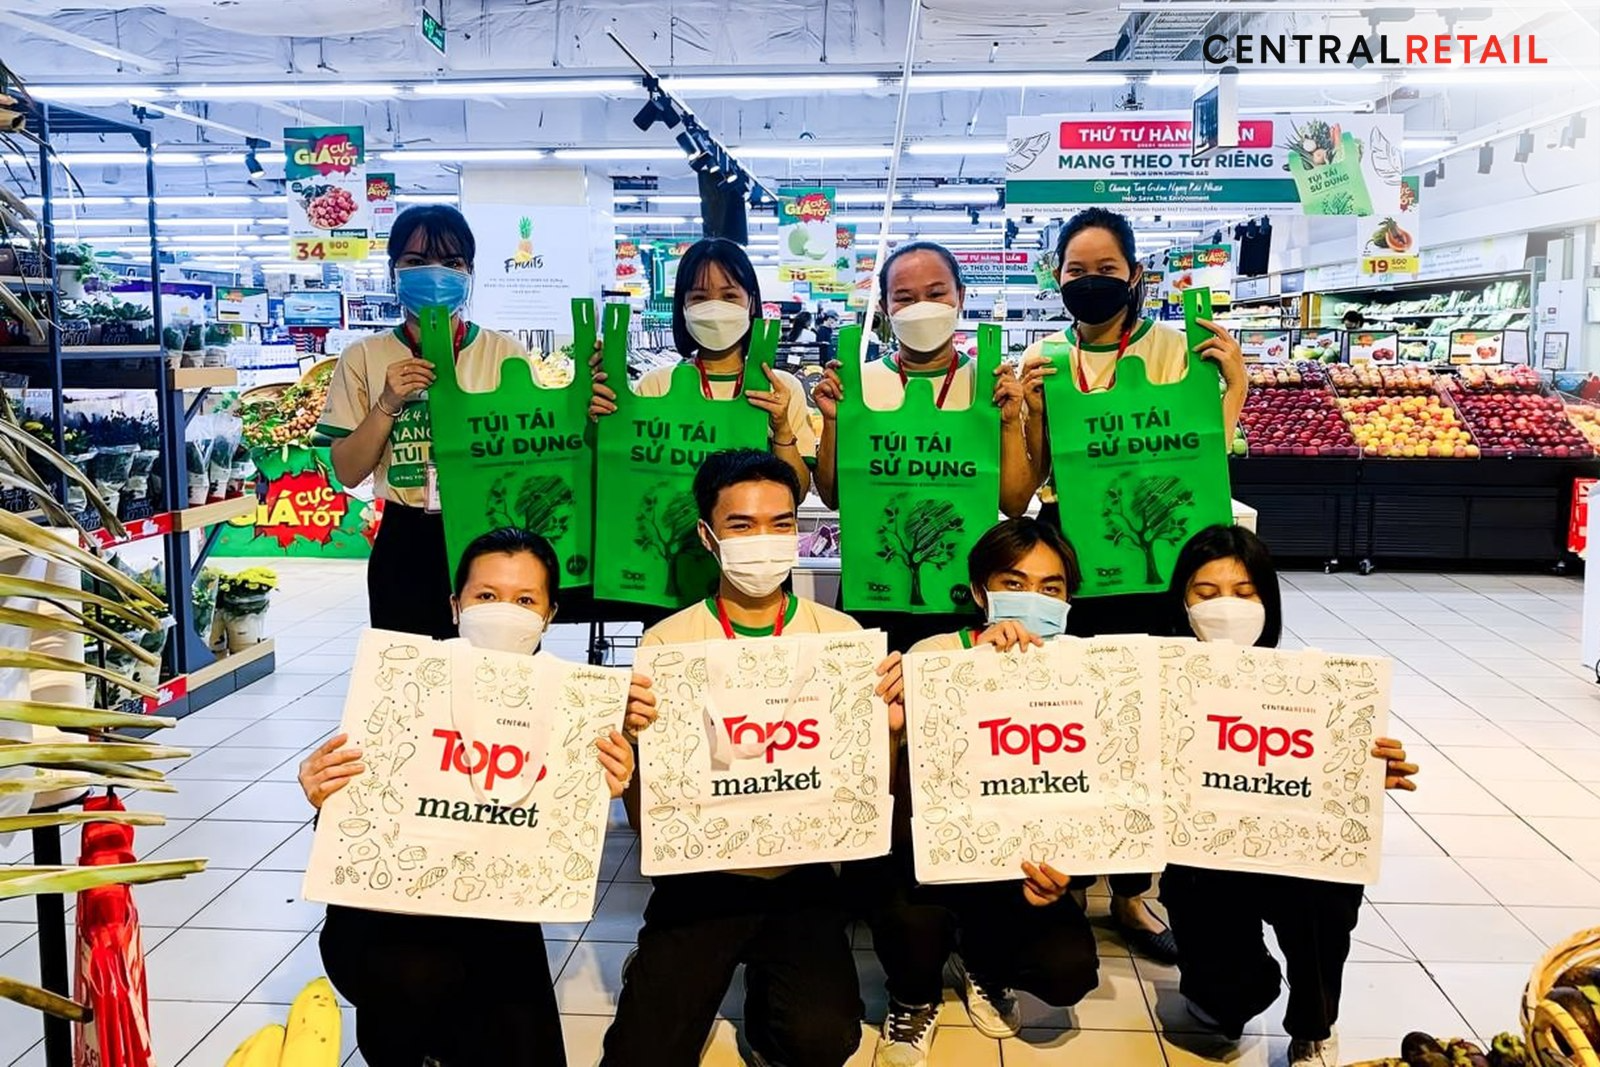 Central Retail in Vietnam organizes the “Bring Your Own Shopping Bag” program at Tops Market